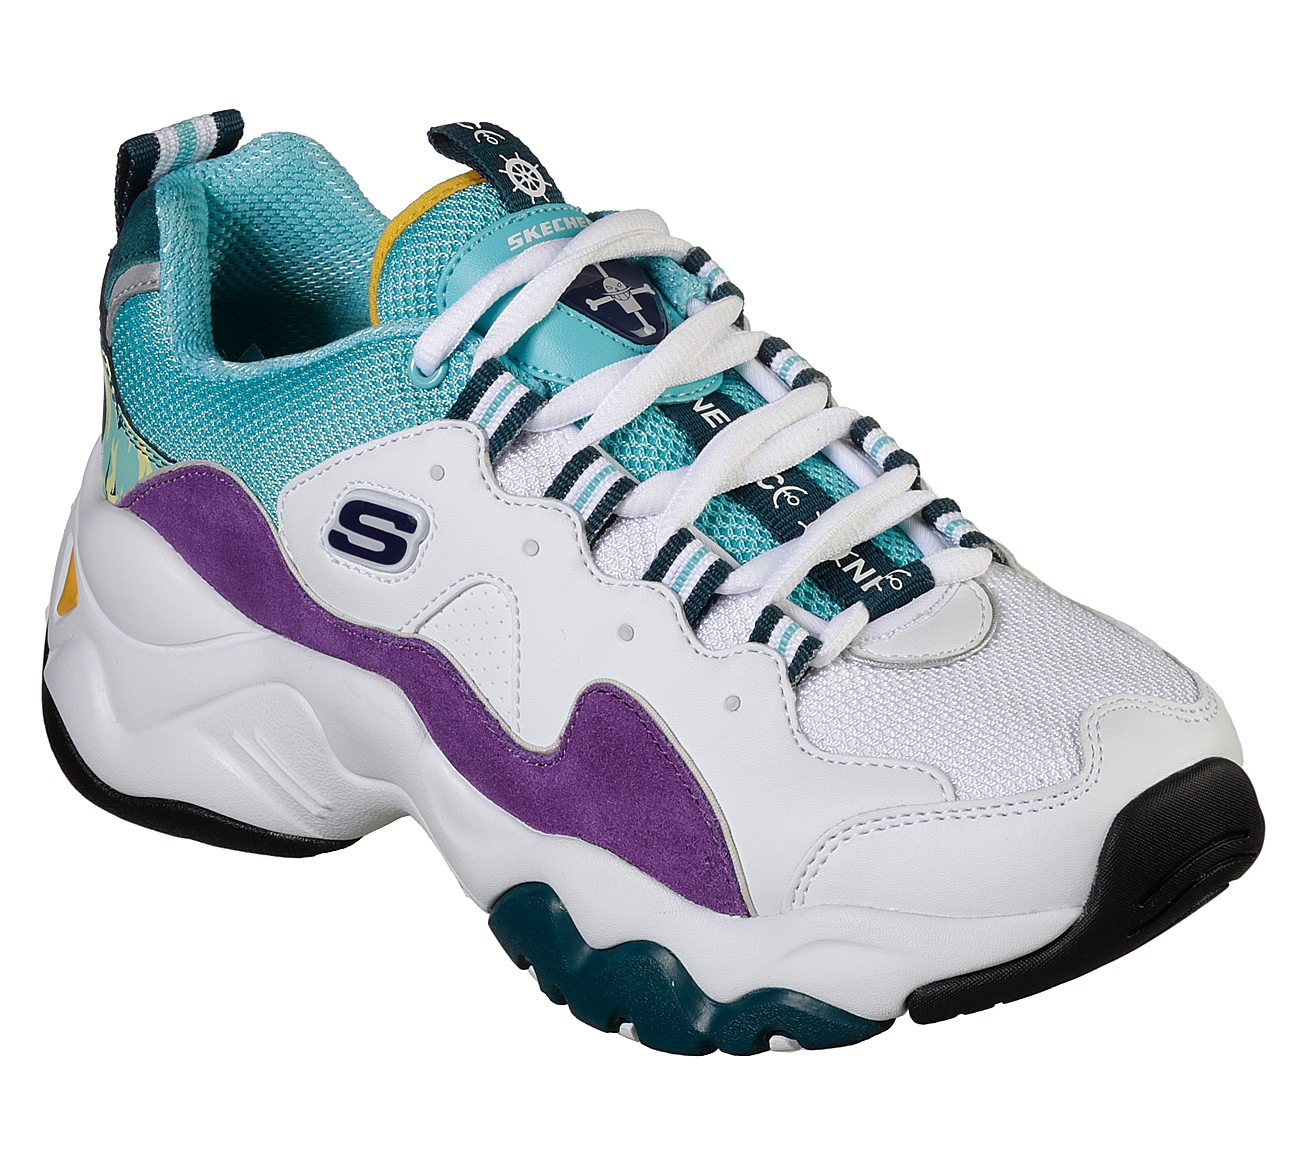 Skechers Collabs With One Piece For New D Lites 3 0 Collection